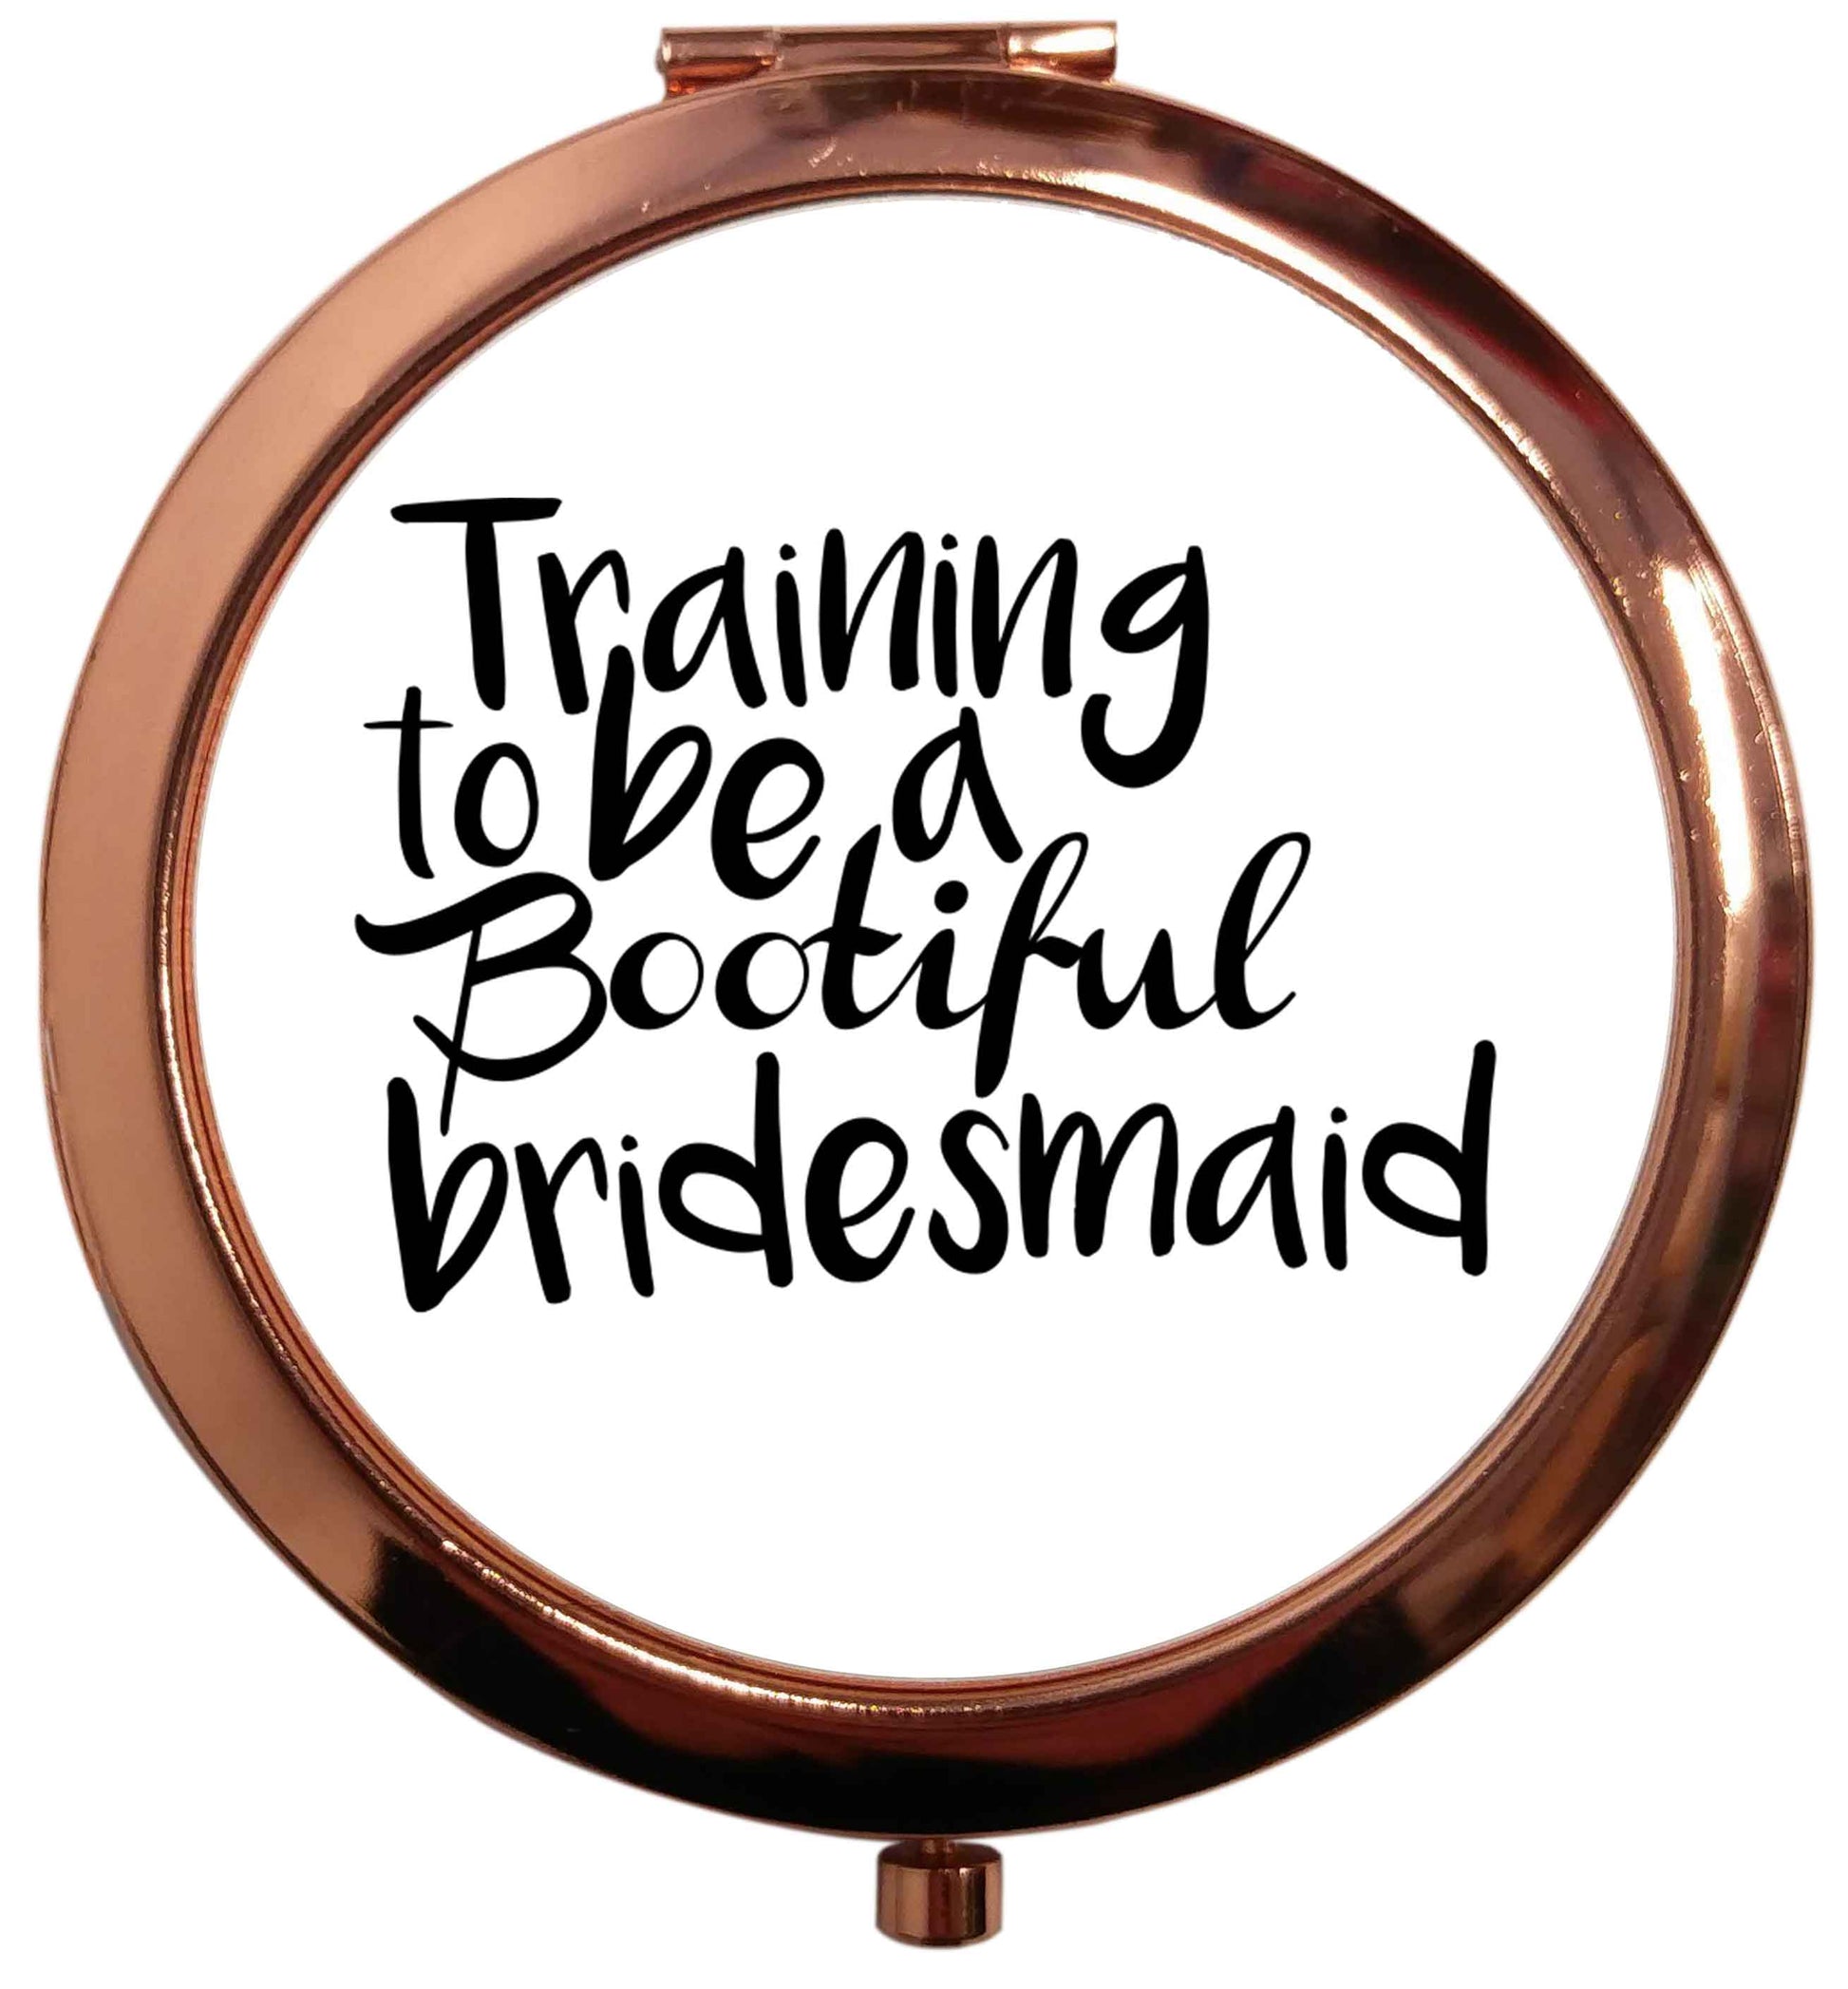 Get motivated and get fit for your big day! Our workout quotes and designs will get you ready to sweat! Perfect for any bride, groom or bridesmaid to be!  rose gold circle pocket mirror